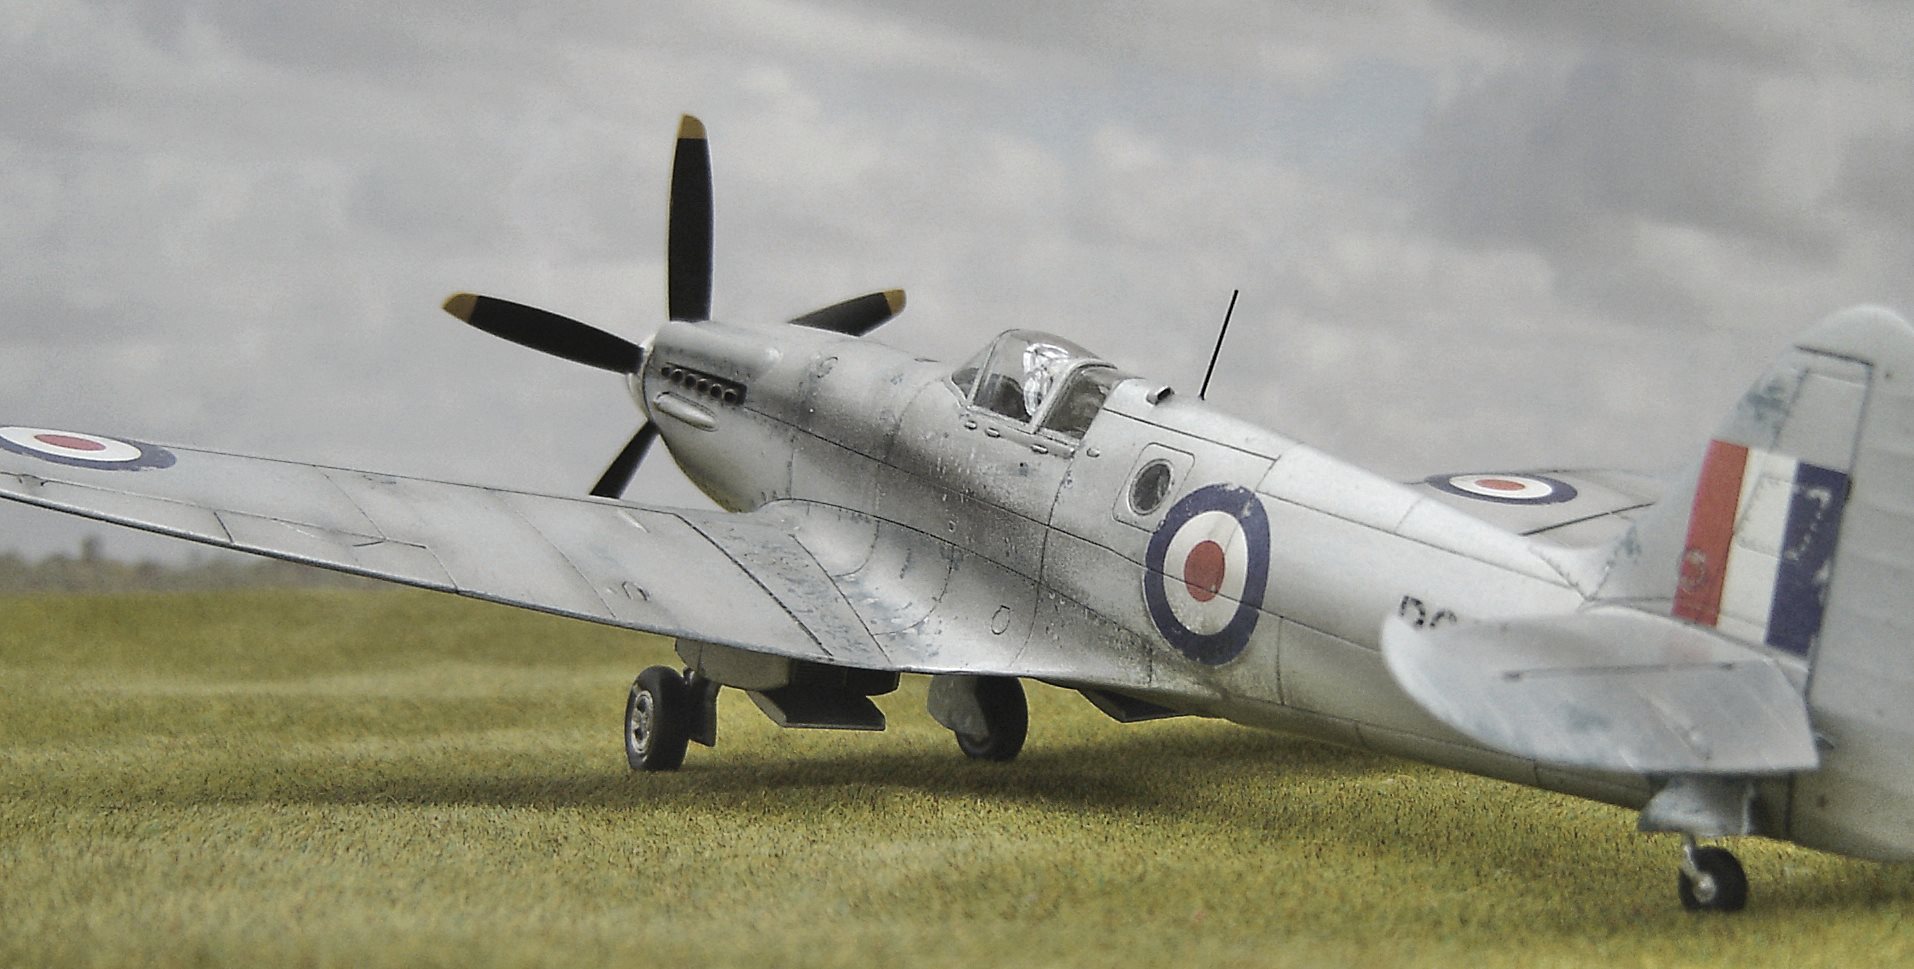 Spitfire PR Mk XIX PS915 of the THUM (Temperature and Humidity Monitoring) Flight from RAF Woodvale in the late 1950’s. Airfix 1/48th scale kit.